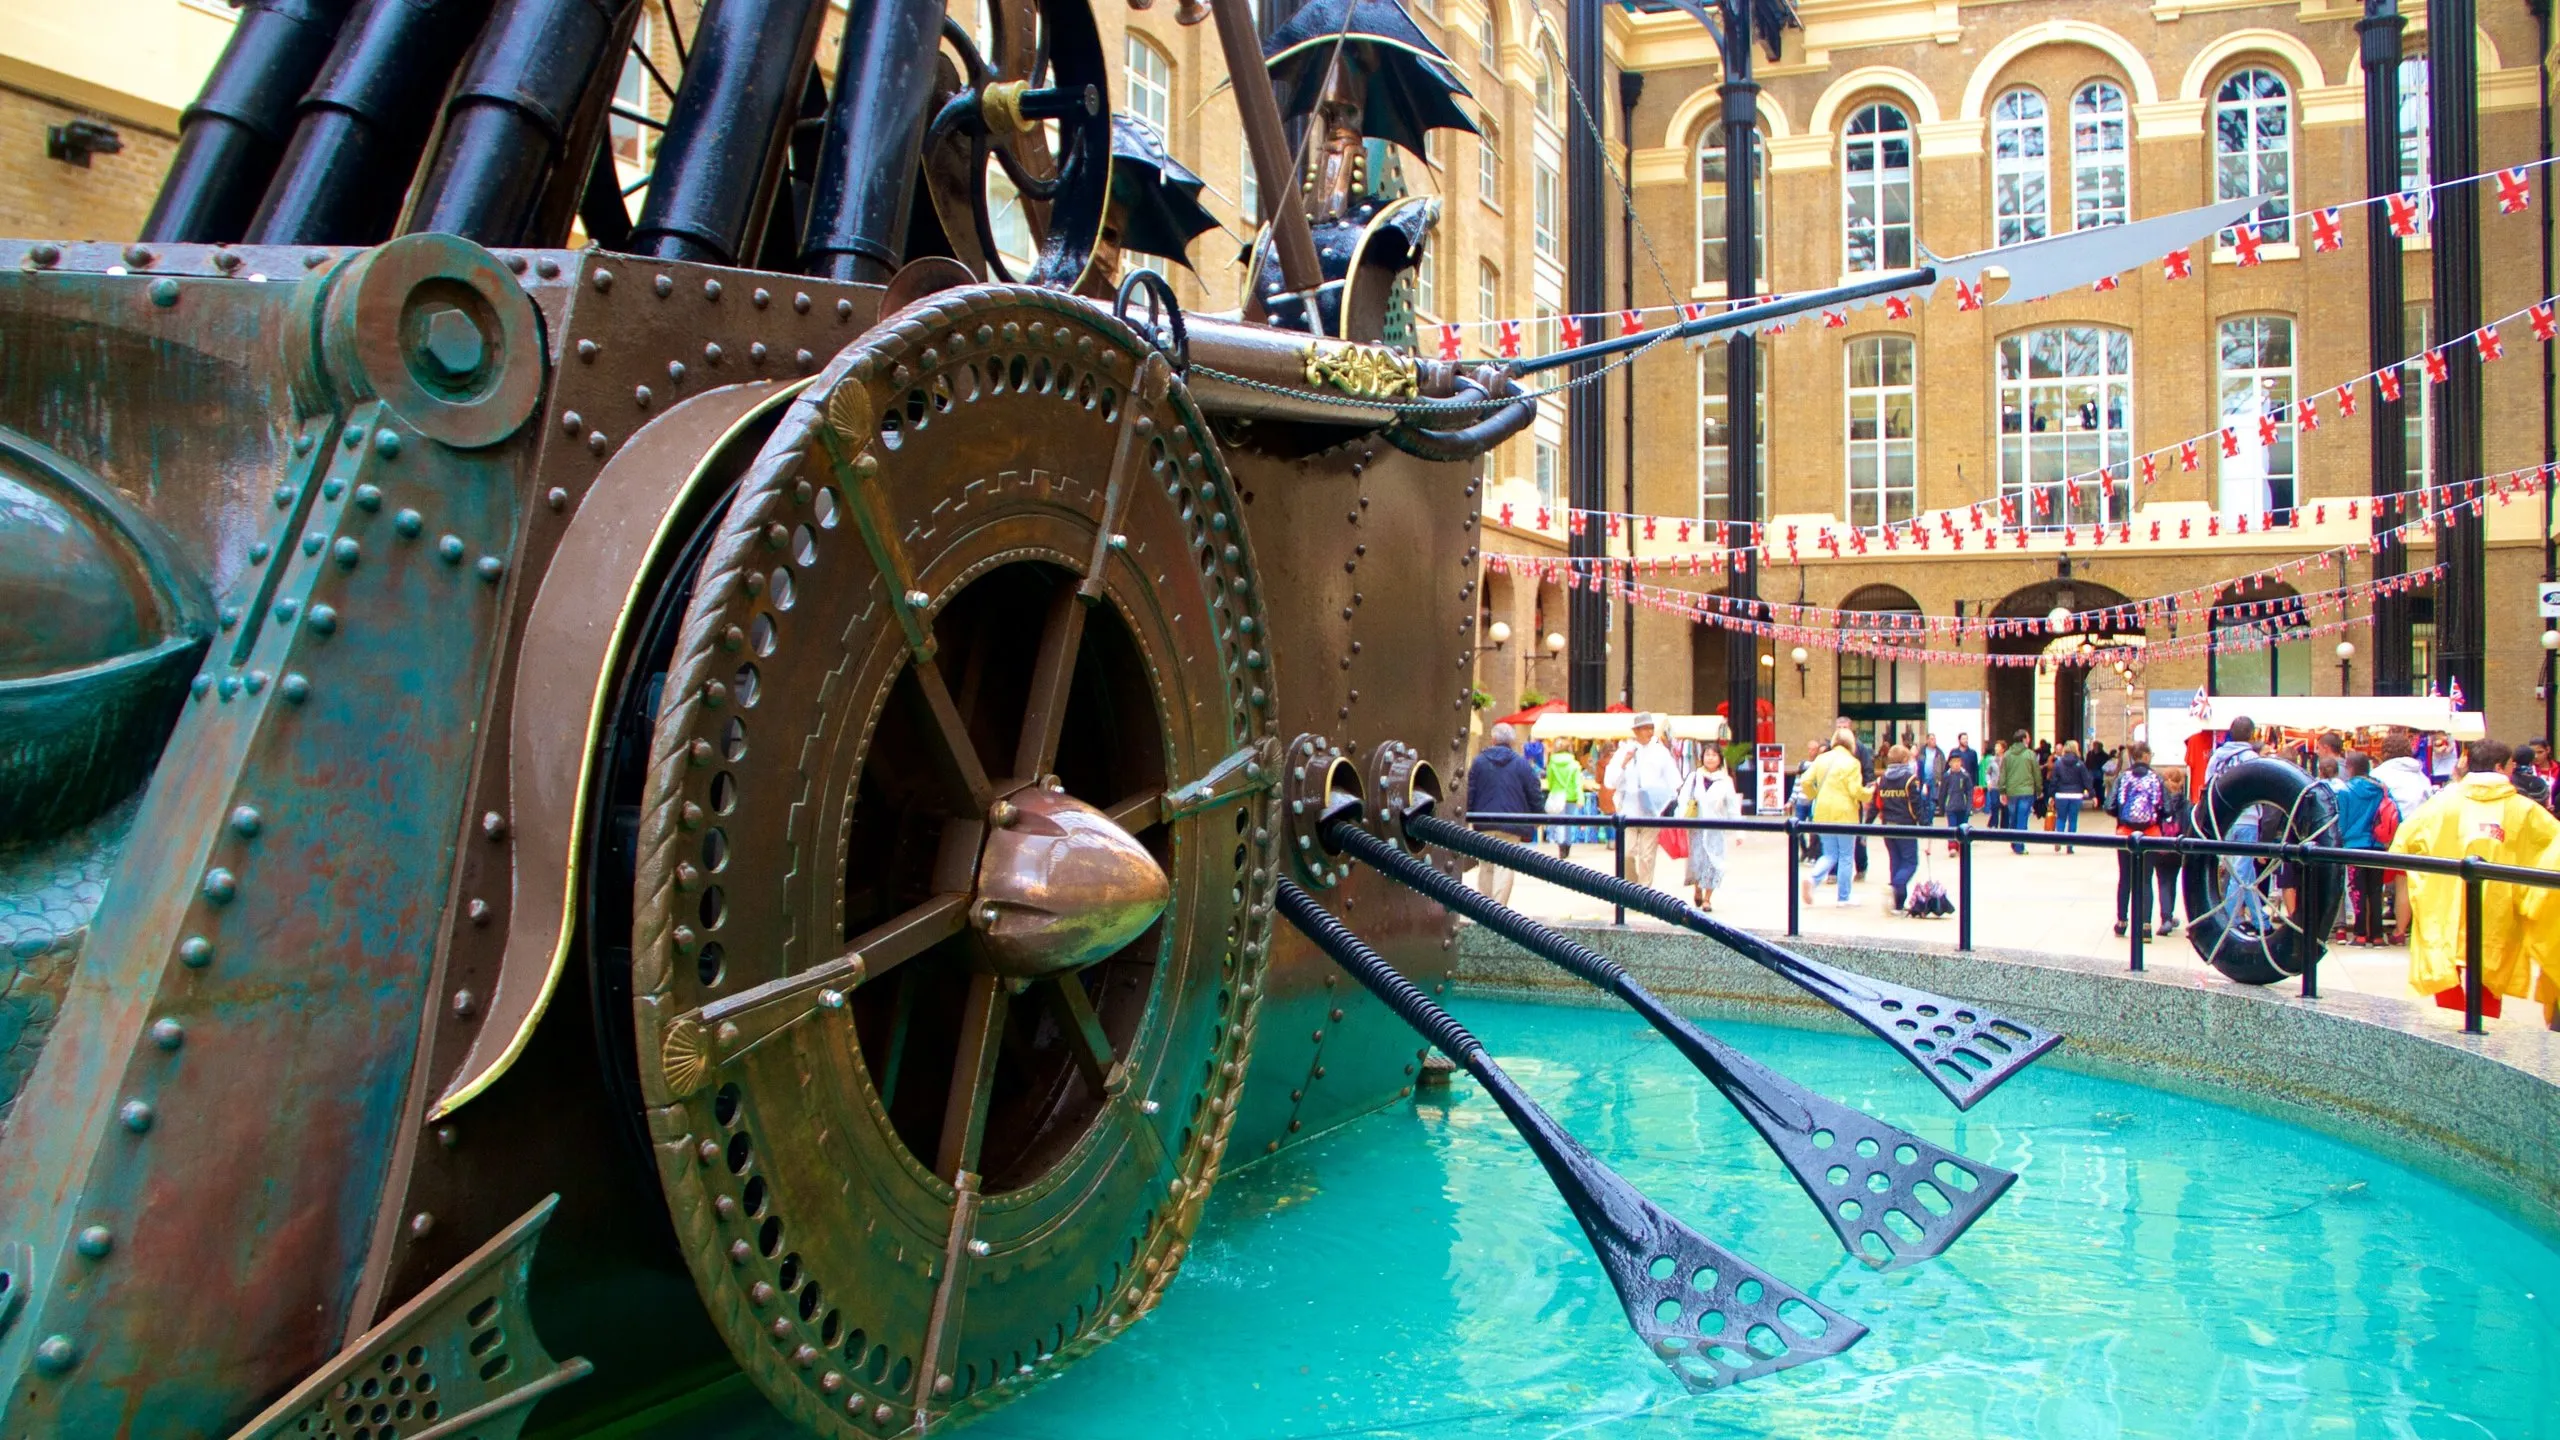 Hay's Galleria in United Kingdom, europe | Handbags,Shoes,Clothes,Cosmetics,Sportswear,Watches,Travel Bags - Rated 4.4